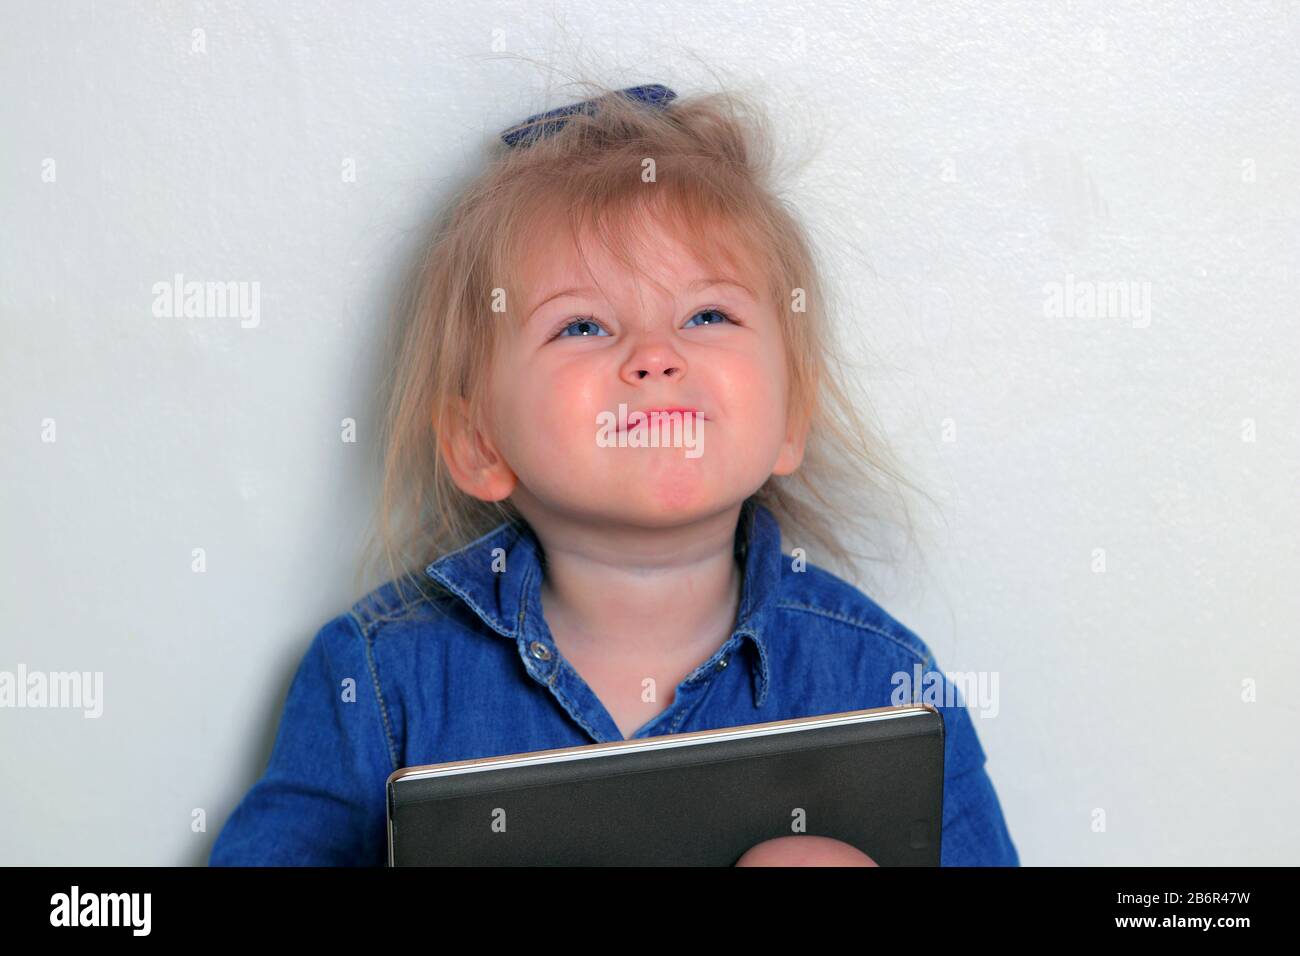 A little girl pulling silly faces while using her tablet. Stock Photo